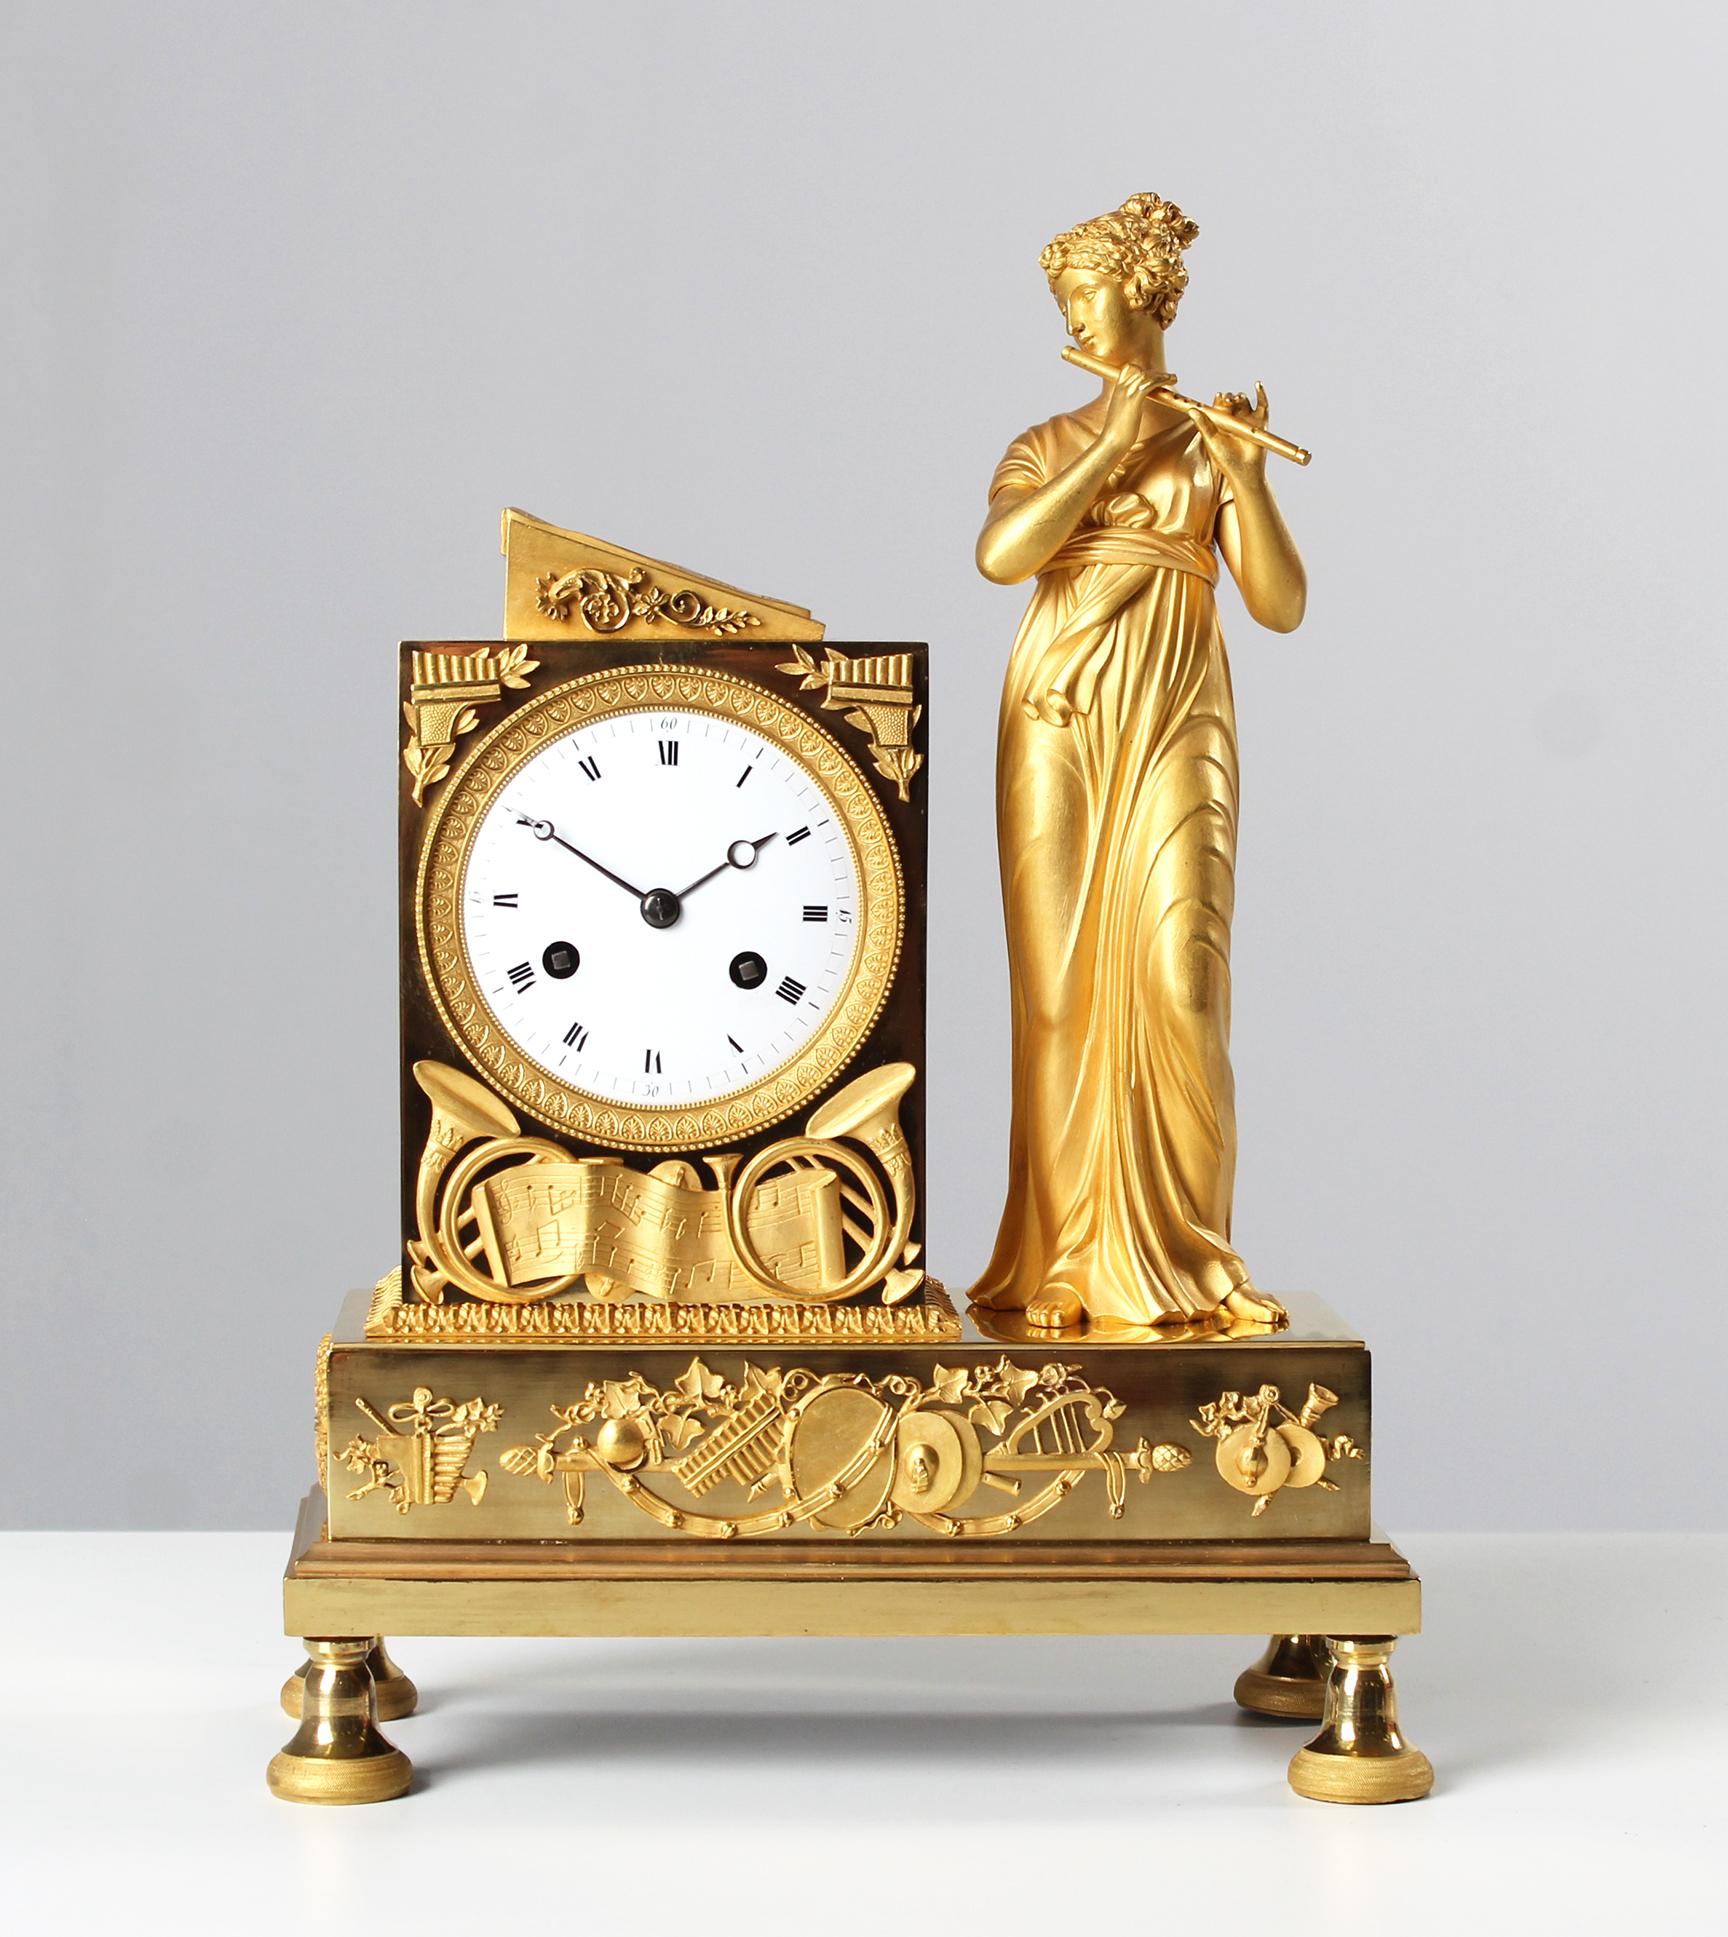 Antique Empire Pendule, Fireplace Clock France circa 1815

France
Bronze gilt
Empire around 1815

Dimensions: H x W x D: 35 x 25 x 12 cm

Description:
Pedestal standing on bell feet with applied musical instruments held by festoons and